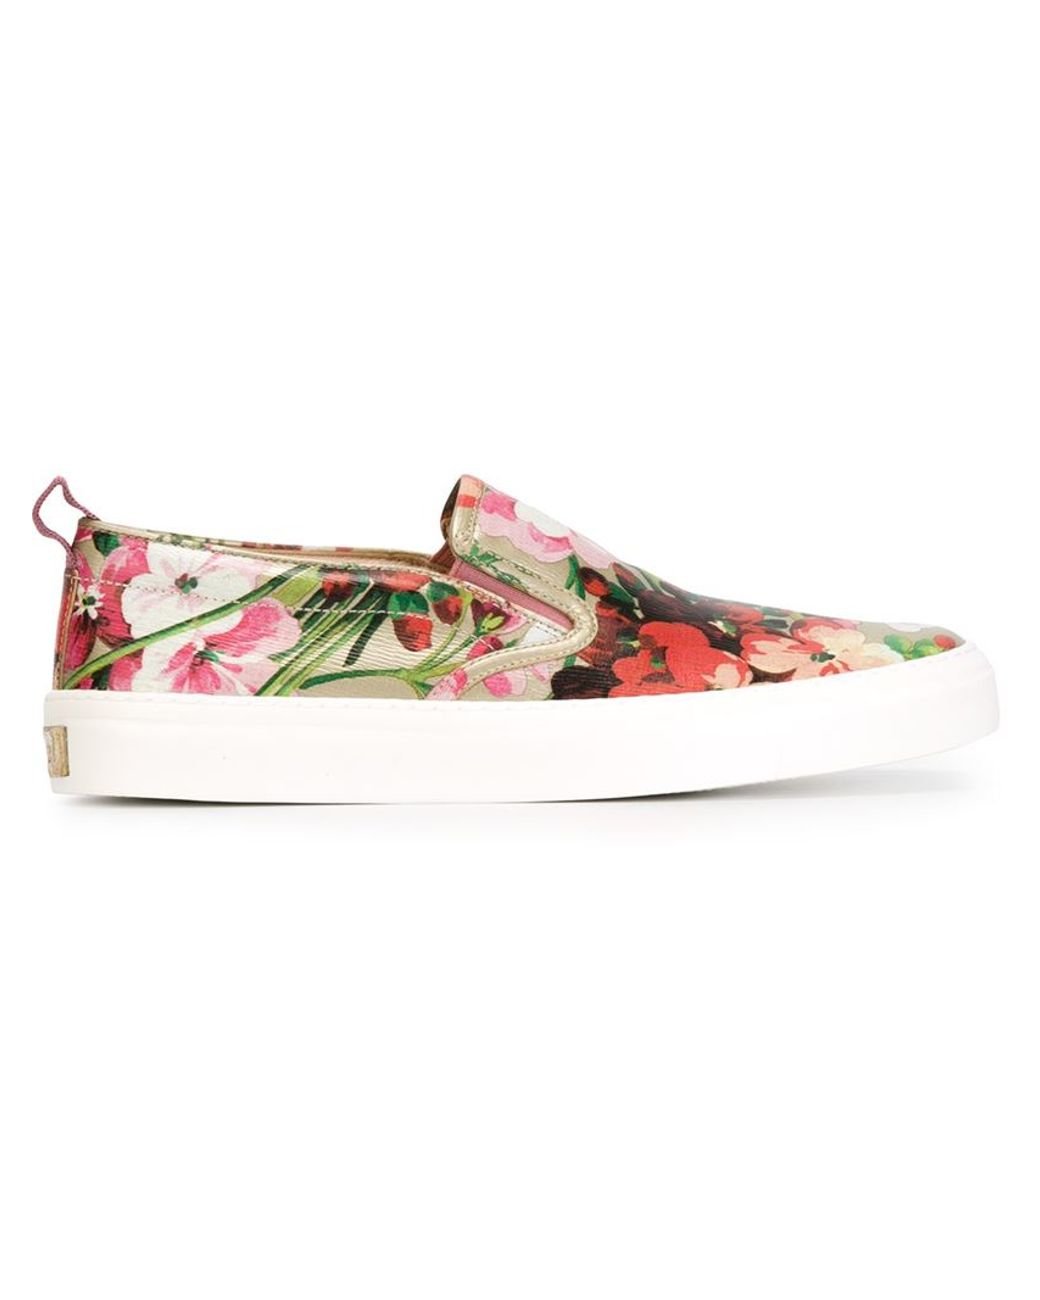 Gucci Floral Print Slip-on Sneakers | Lyst